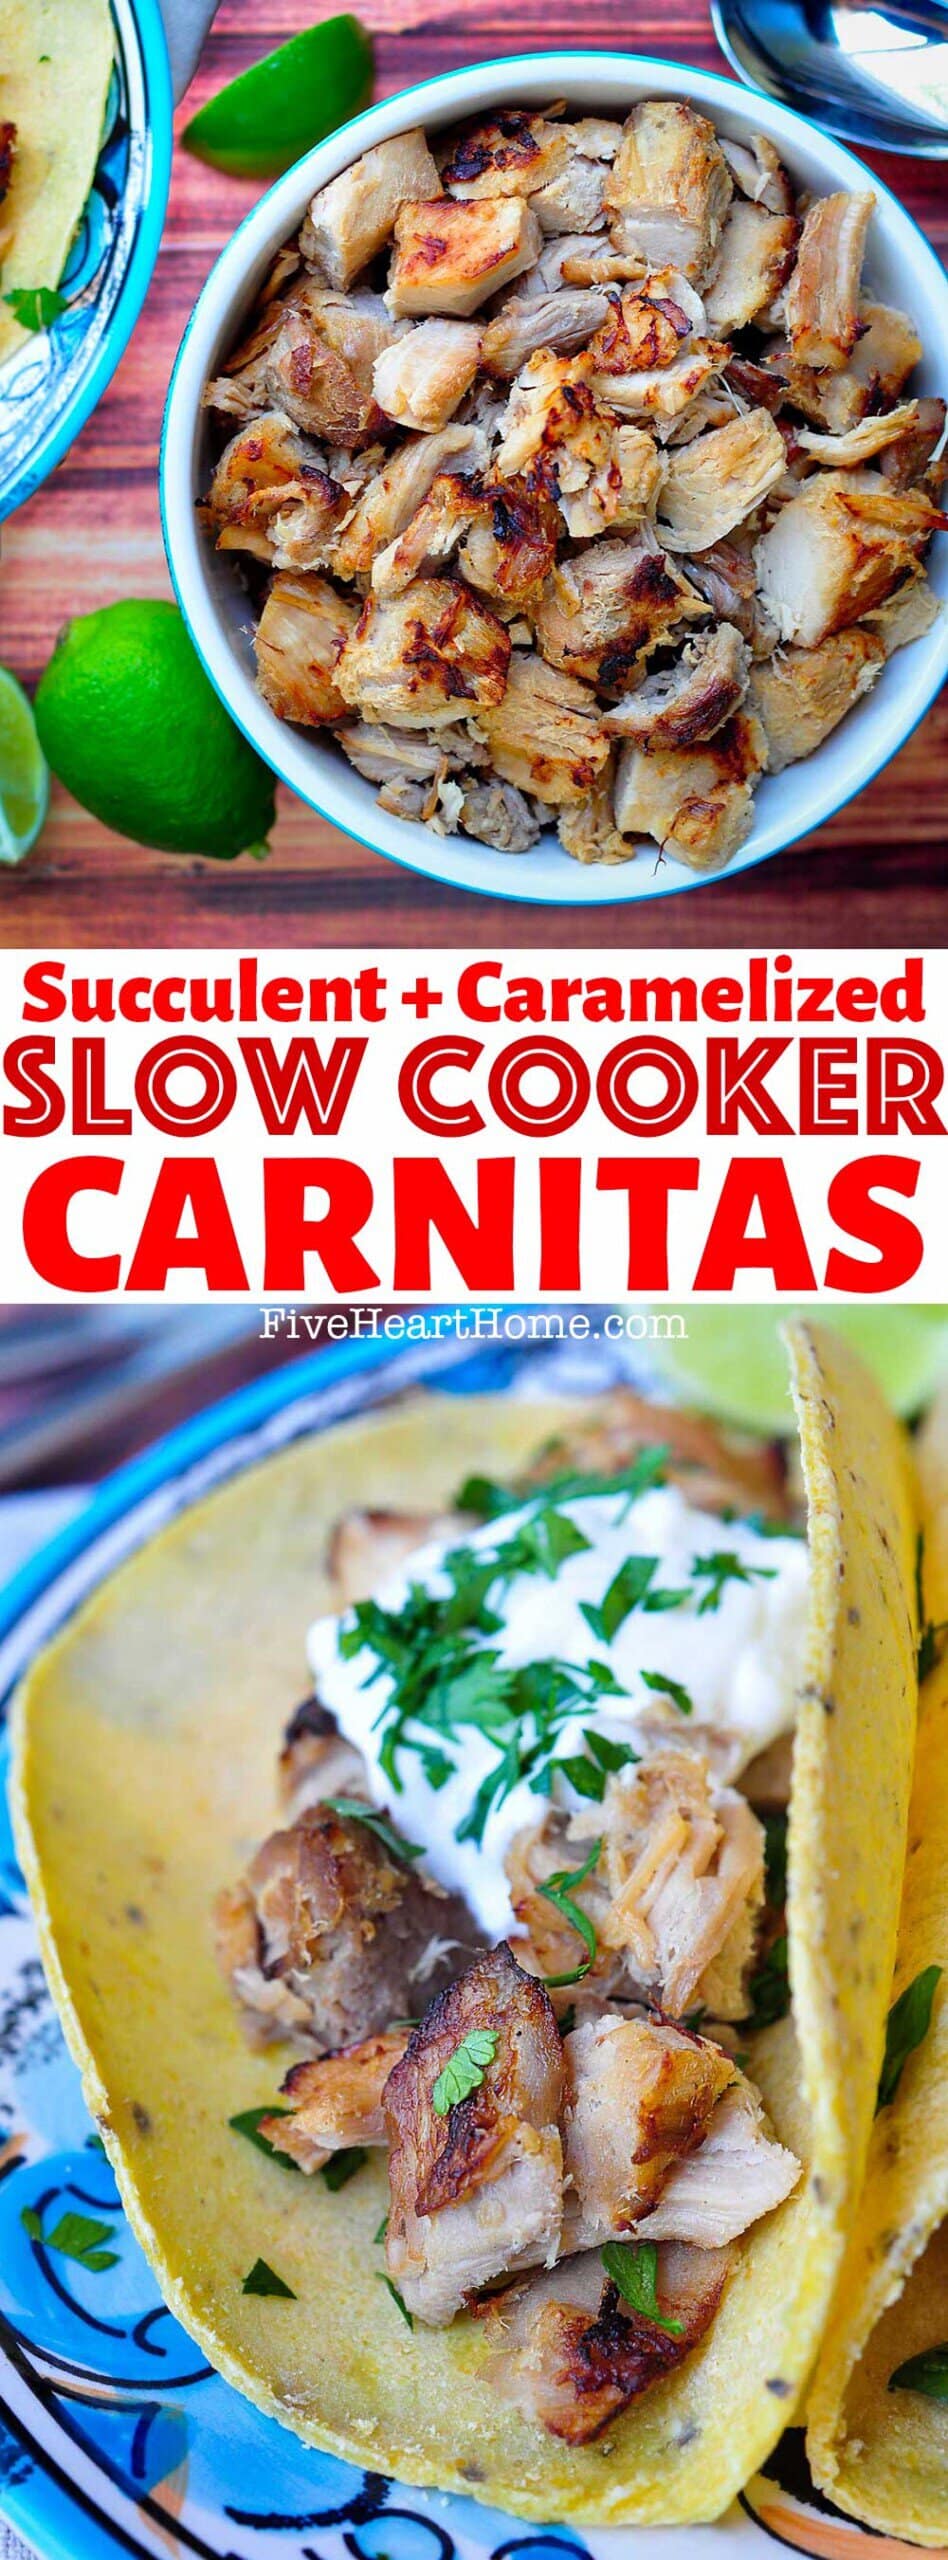 Slow Cooker Carnitas ~ this carnitas recipe effortlessly comes together in the crock pot, where pork is braised in an aromatic broth, cubed, and then finished off under the broiler. The result is succulent, caramelized, pork carnitas that are delicious as carnitas tacos or as a filling for burritos, enchiladas, quesadillas, and more! | FiveHeartHome.com via @fivehearthome